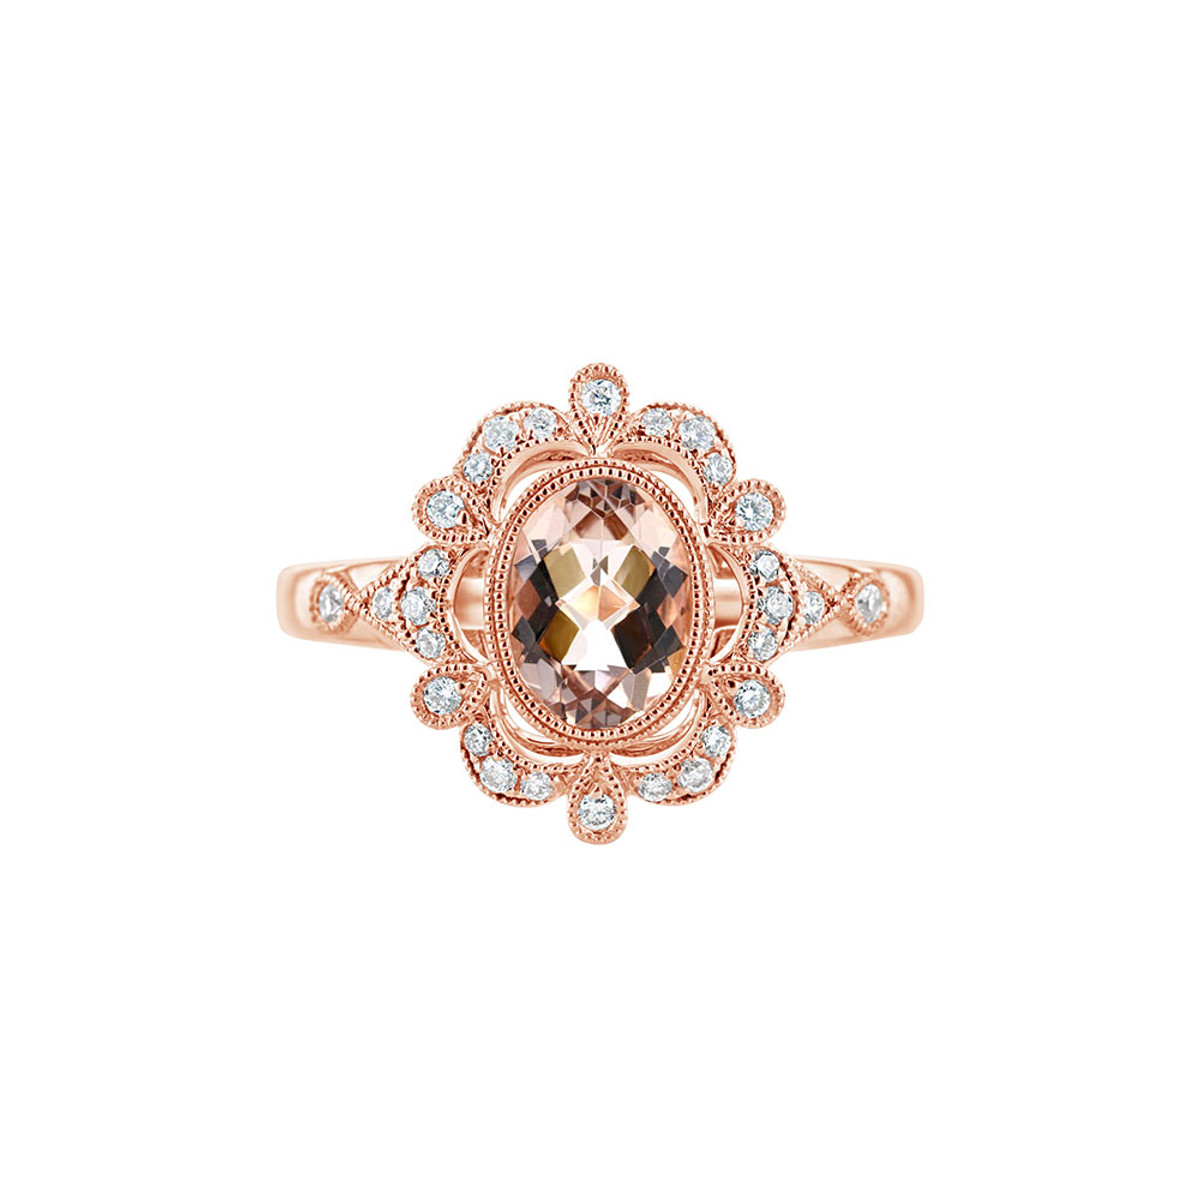 Little Bird 18KT Rose Gold, Diamond & Morganite Lace Halo Engagement Ring-DCSPR1581 Product Image